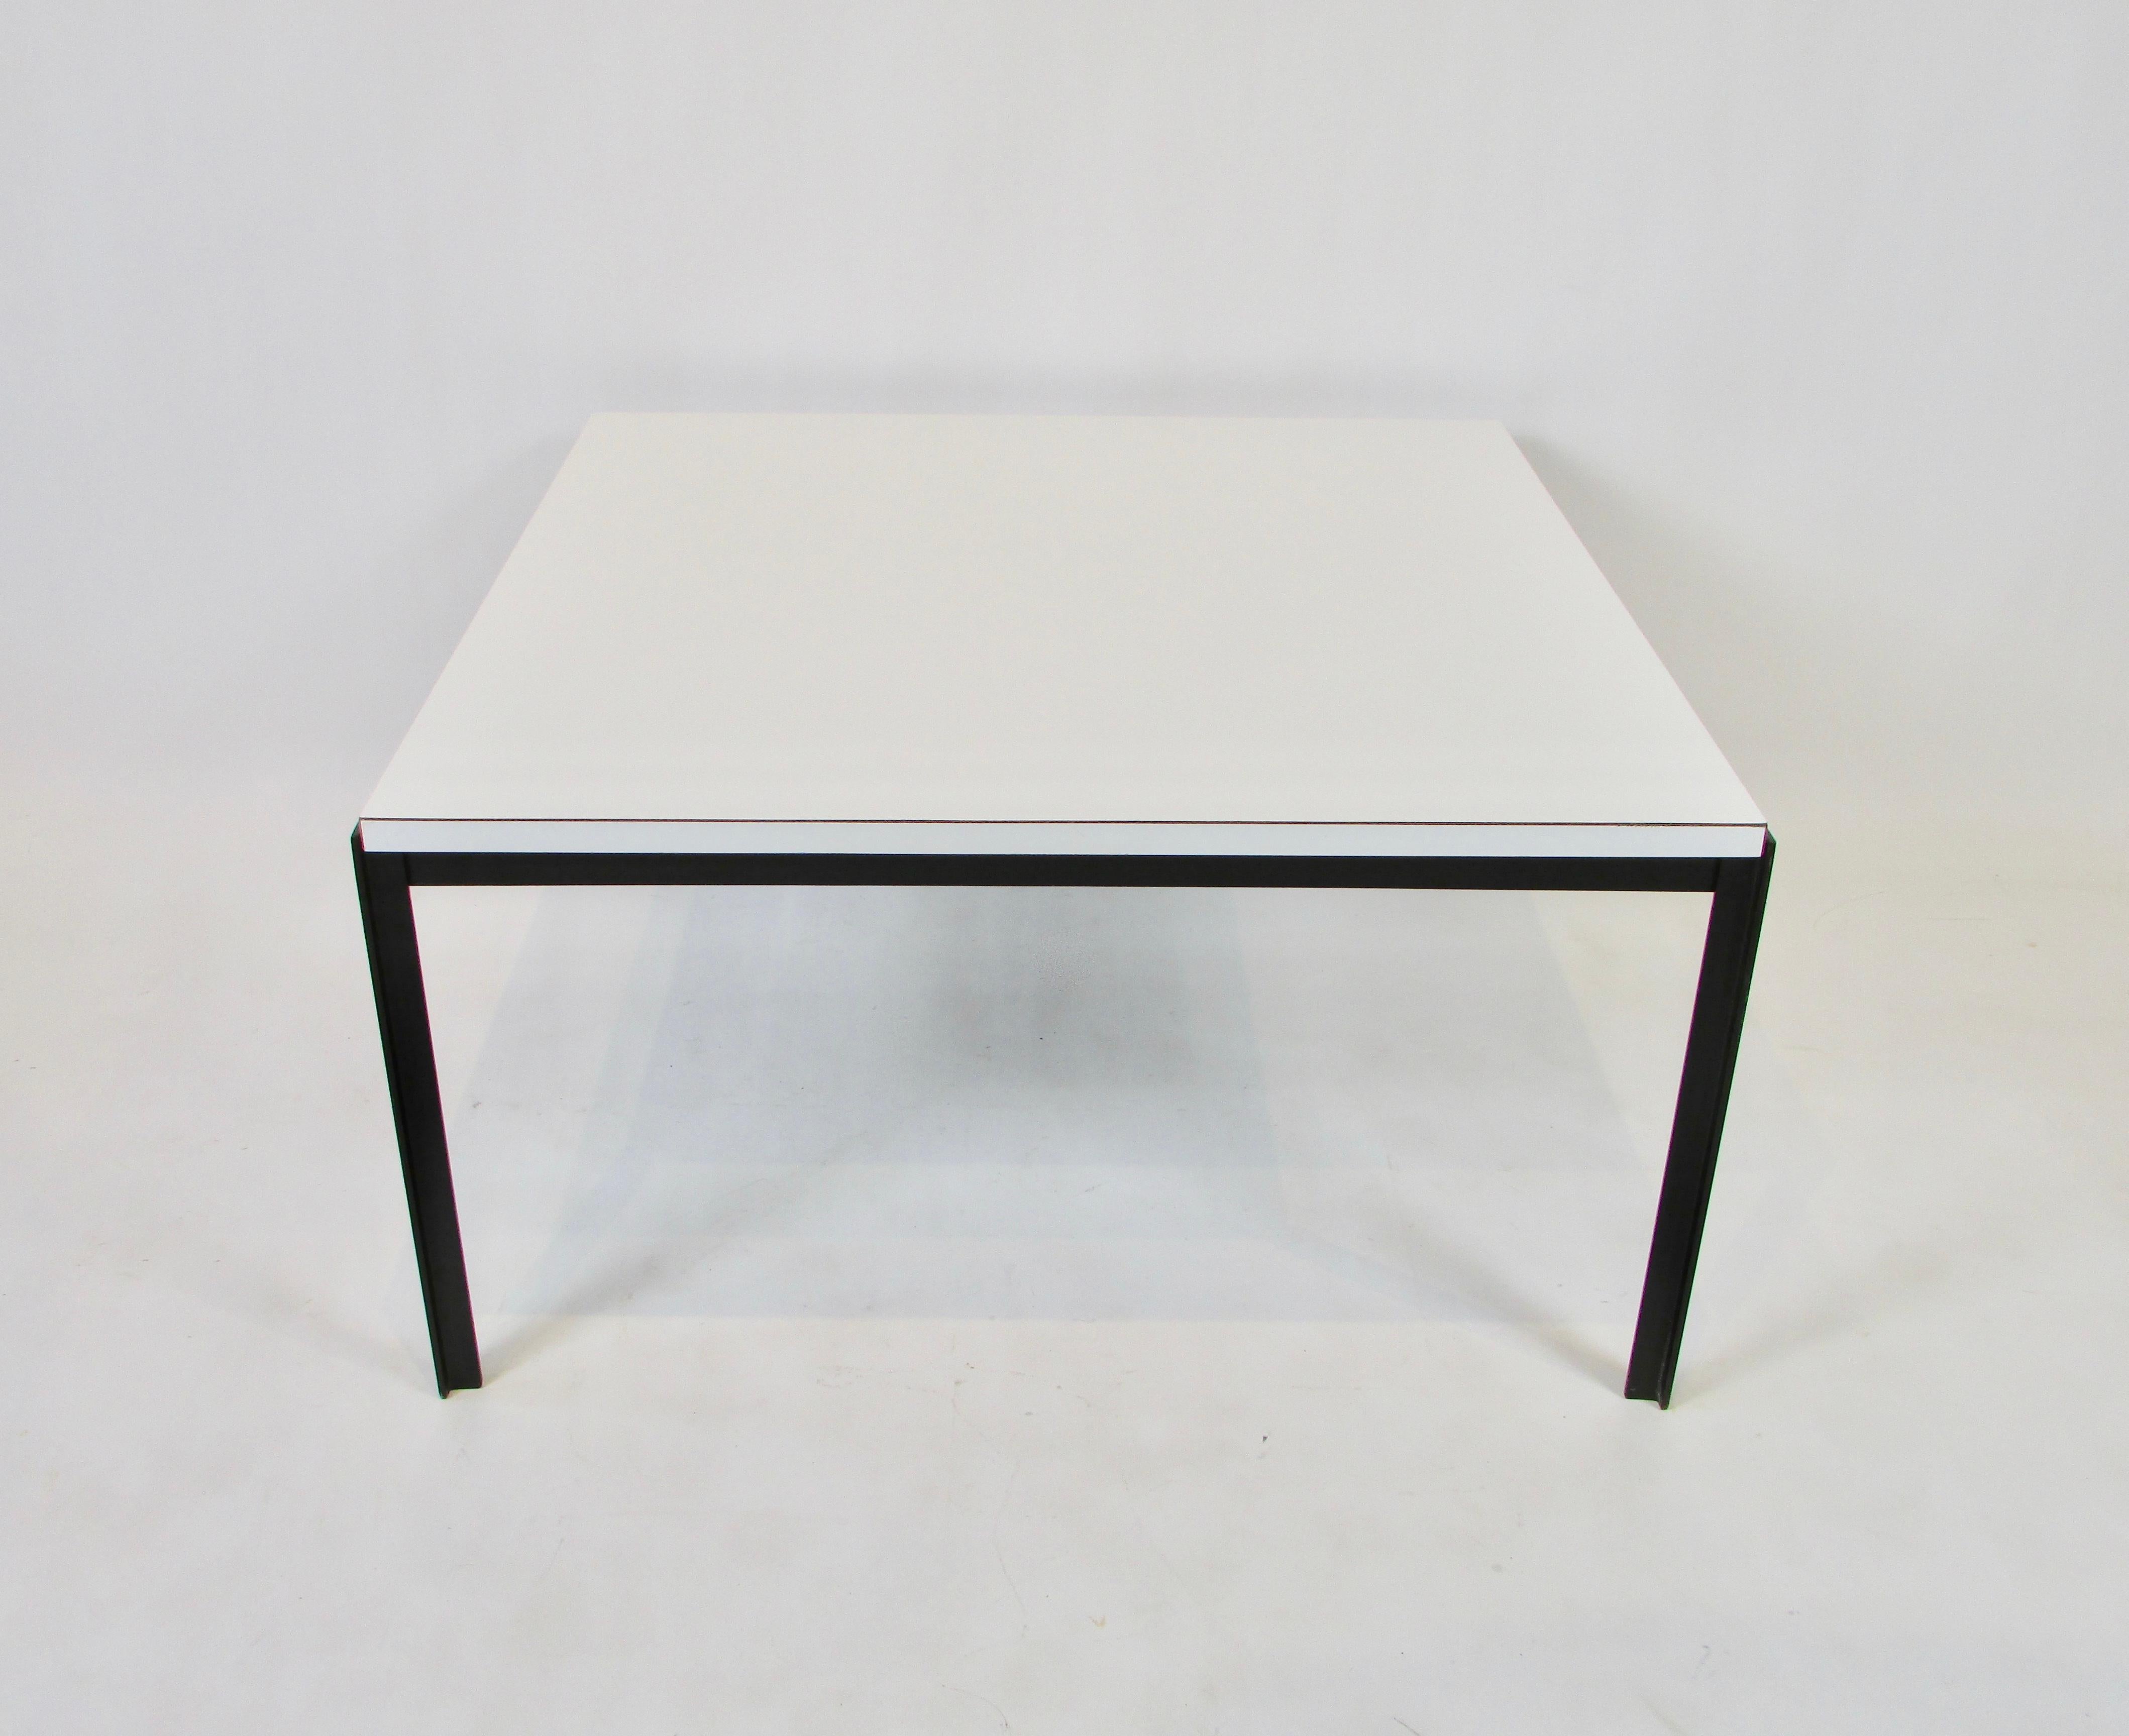 An iron based coffee or side table with a white laminate top by Florence Knoll, 1960s. Good original condition. Original label on underside.